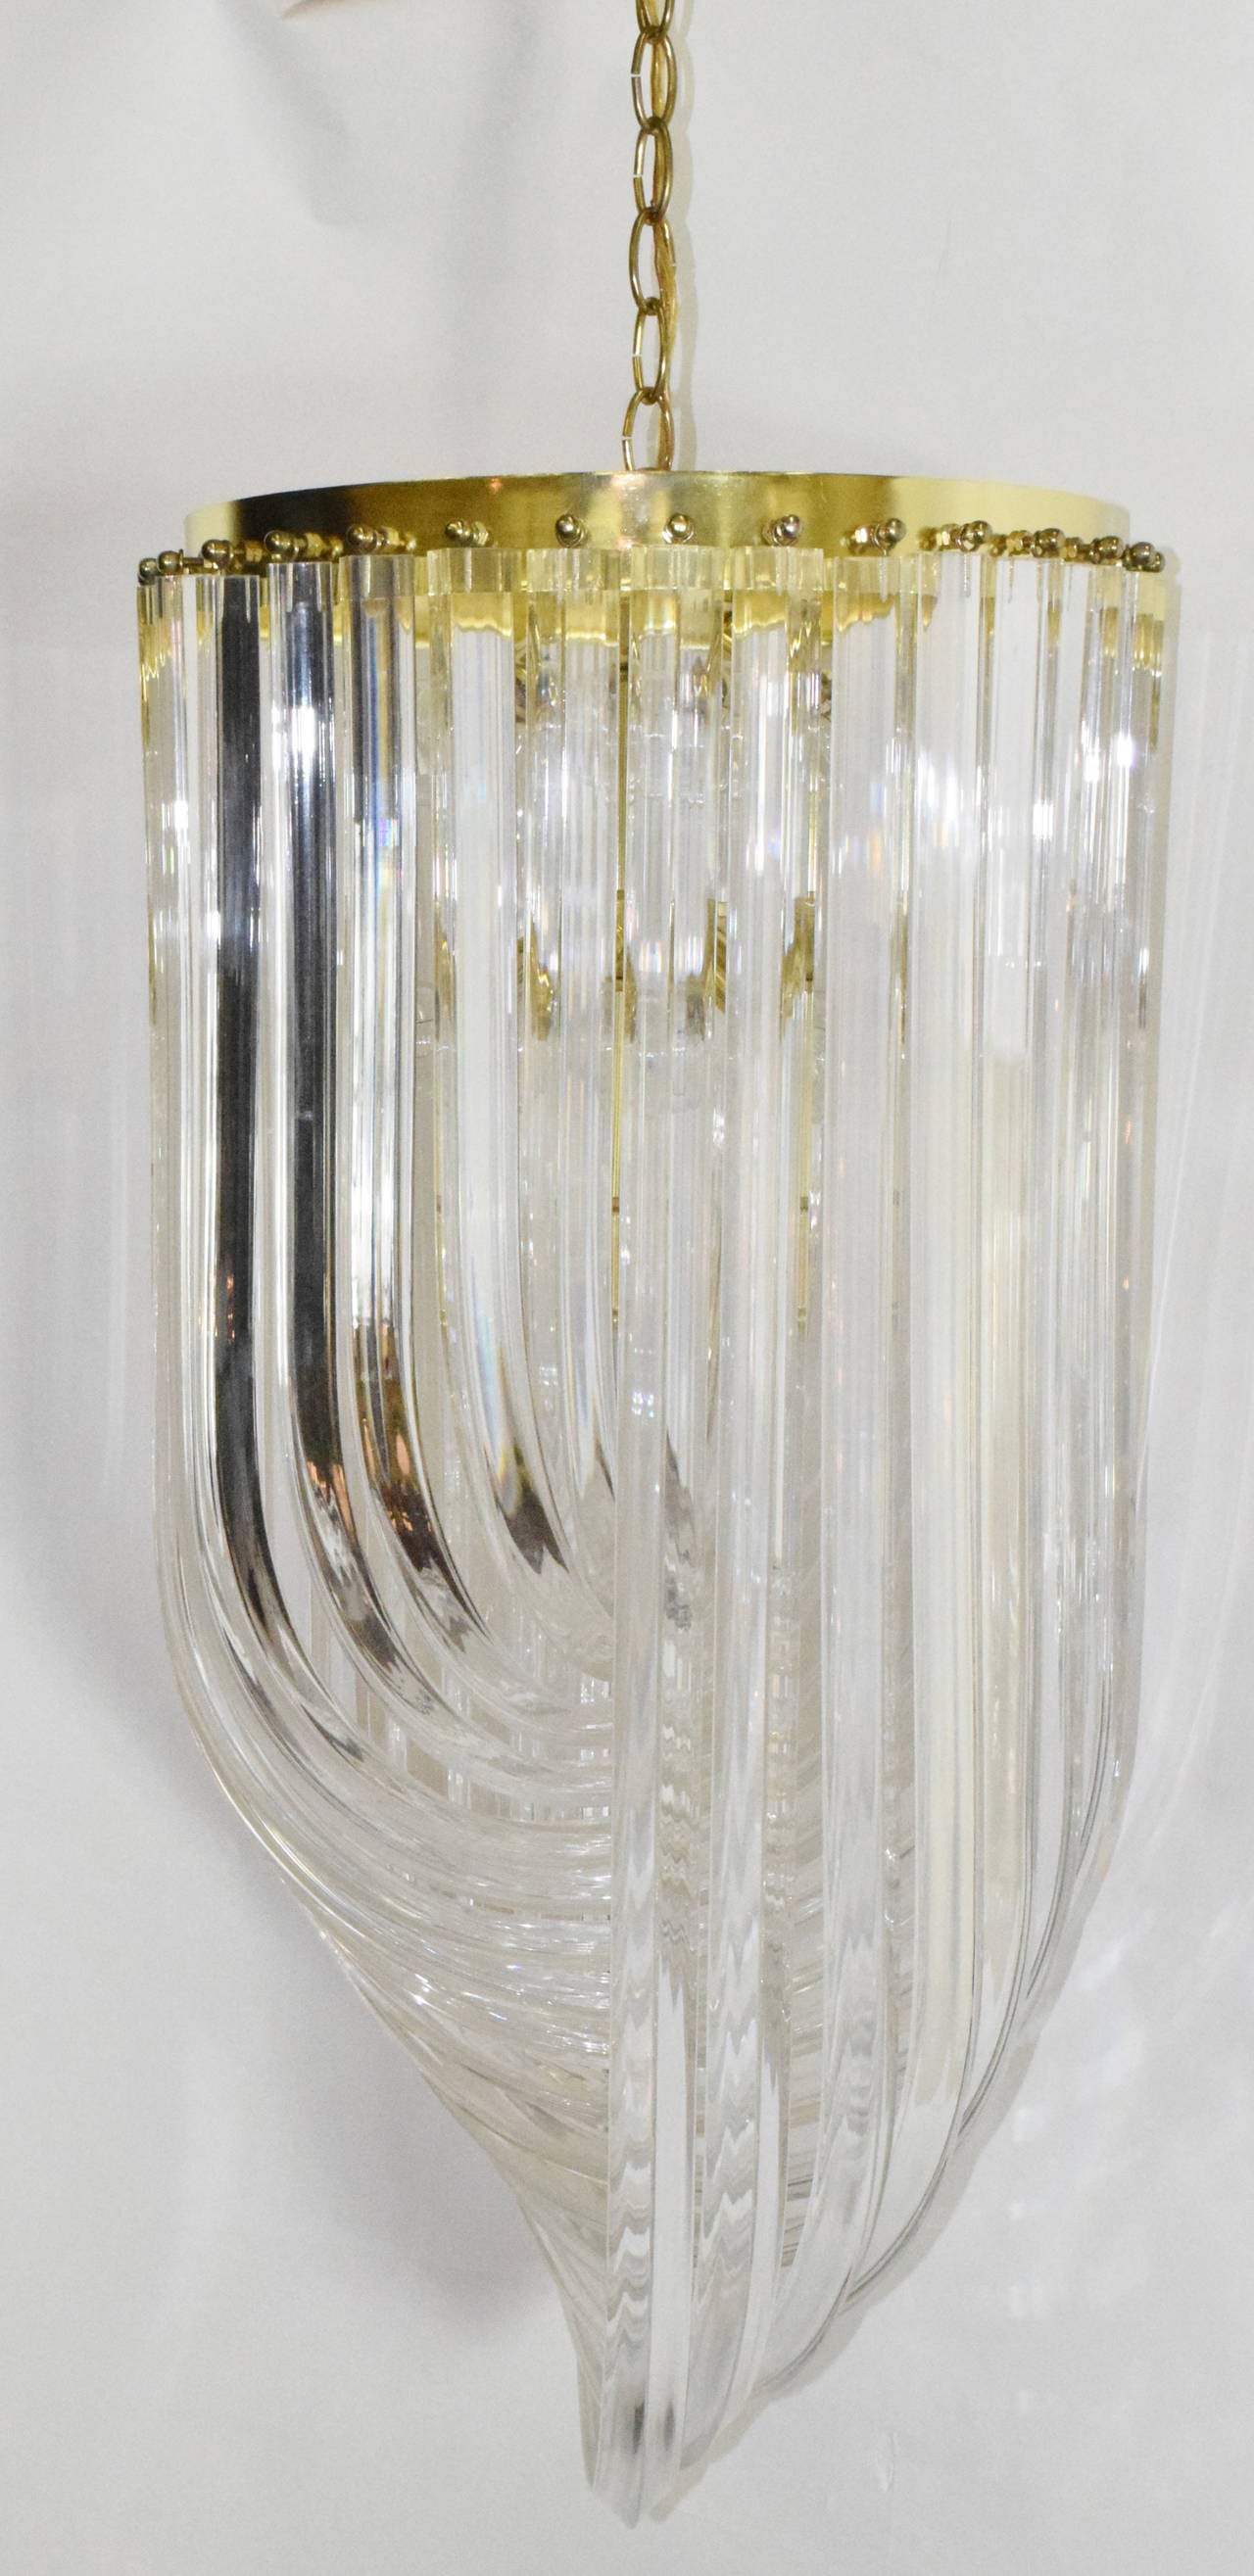 This is a beautiful tall chandelier with brass finished stem and graduating lucite bands. Includes sockets for 12 bulbs. 1960s